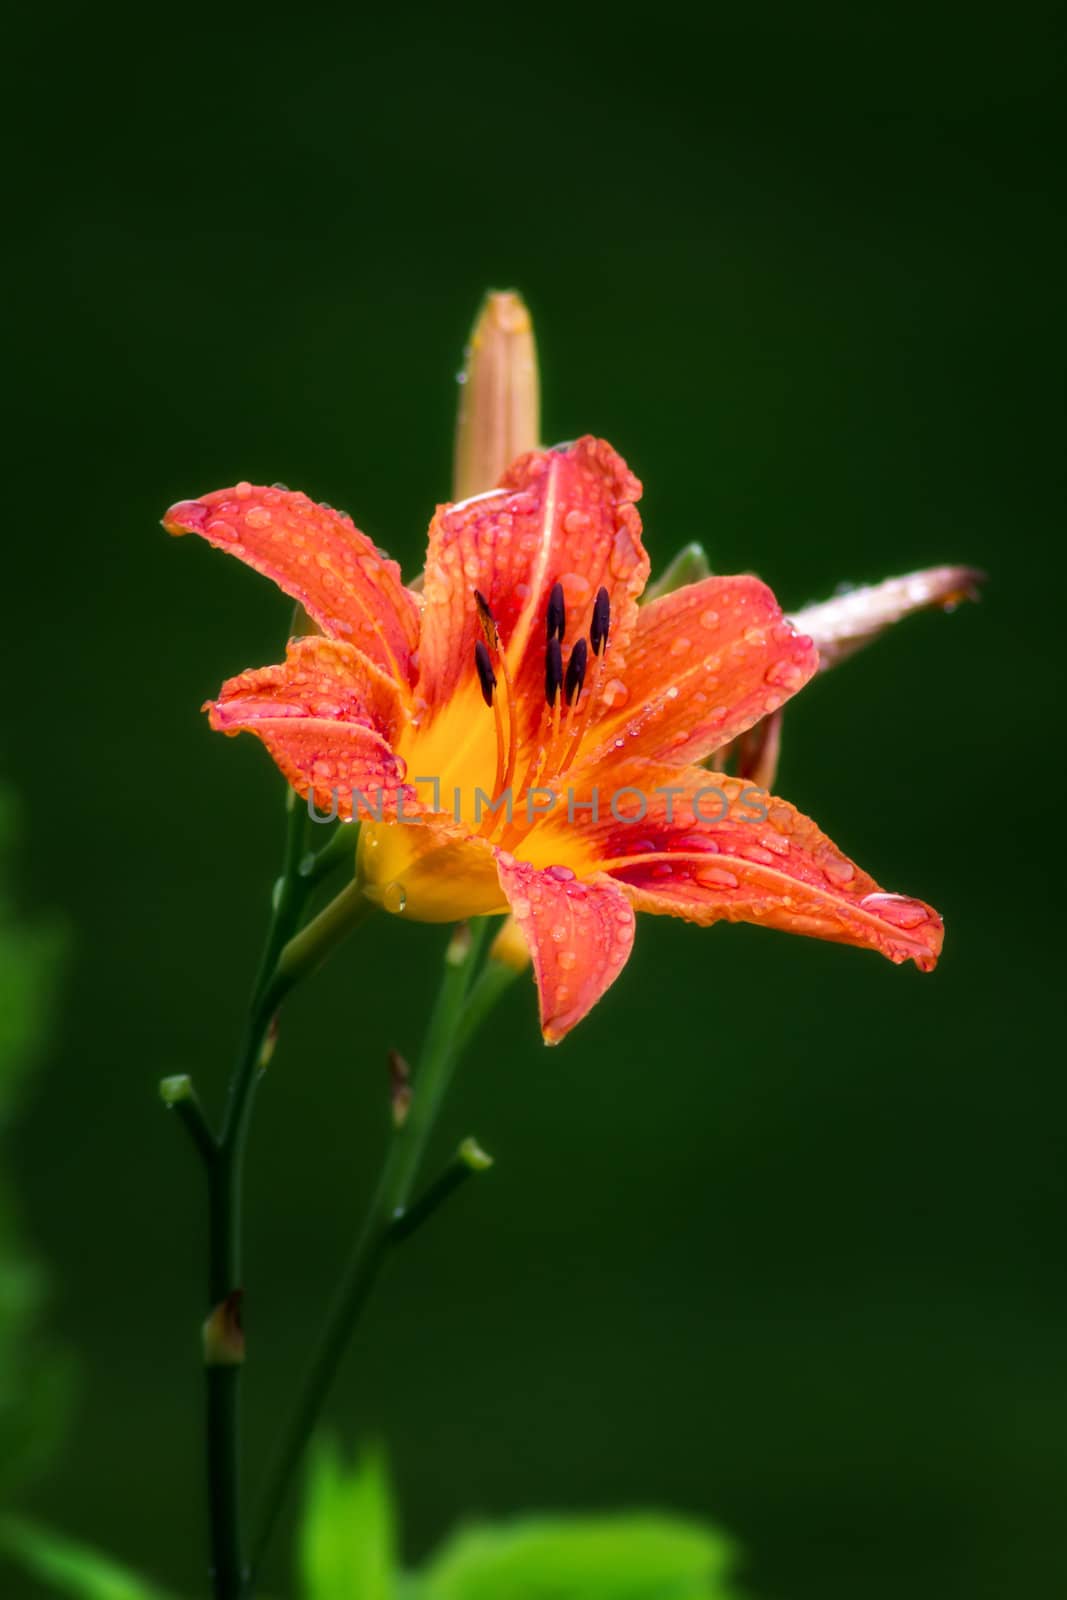 Orange Daylily After the Rain by wolterk